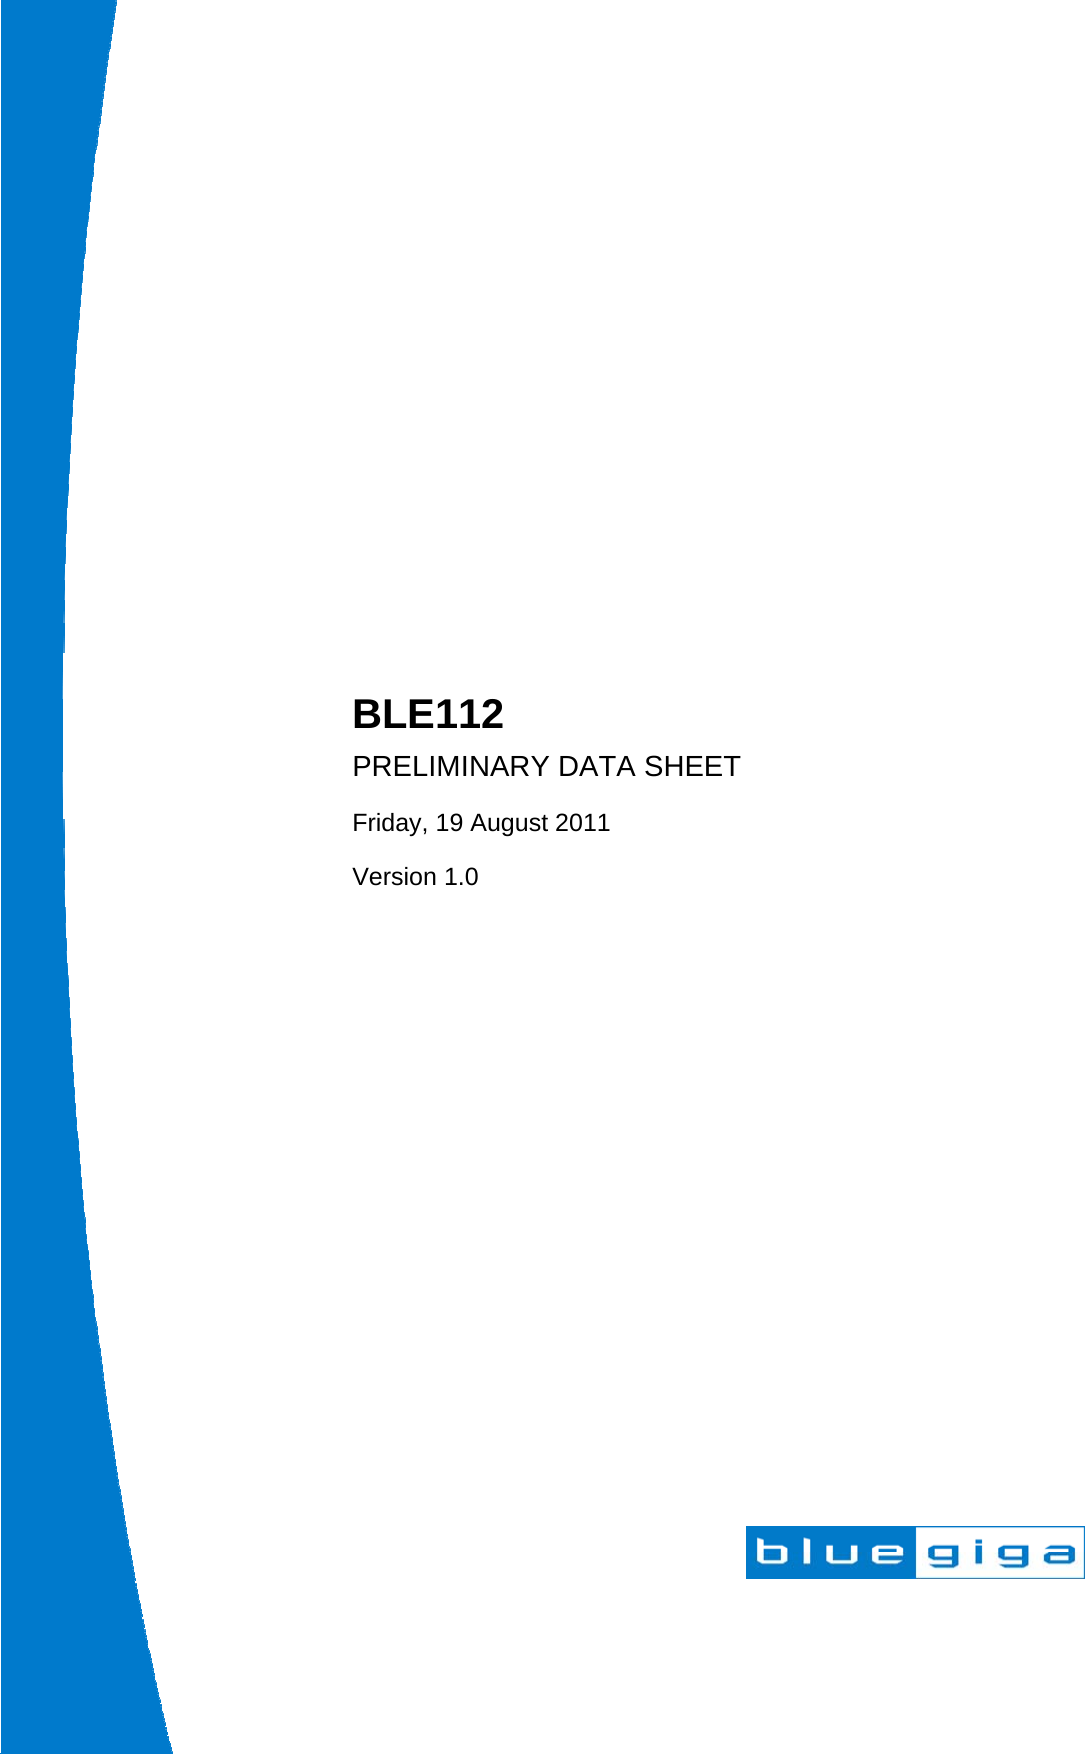                      BLE112 PRELIMINARY DATA SHEET Friday, 19 August 2011 Version 1.0  